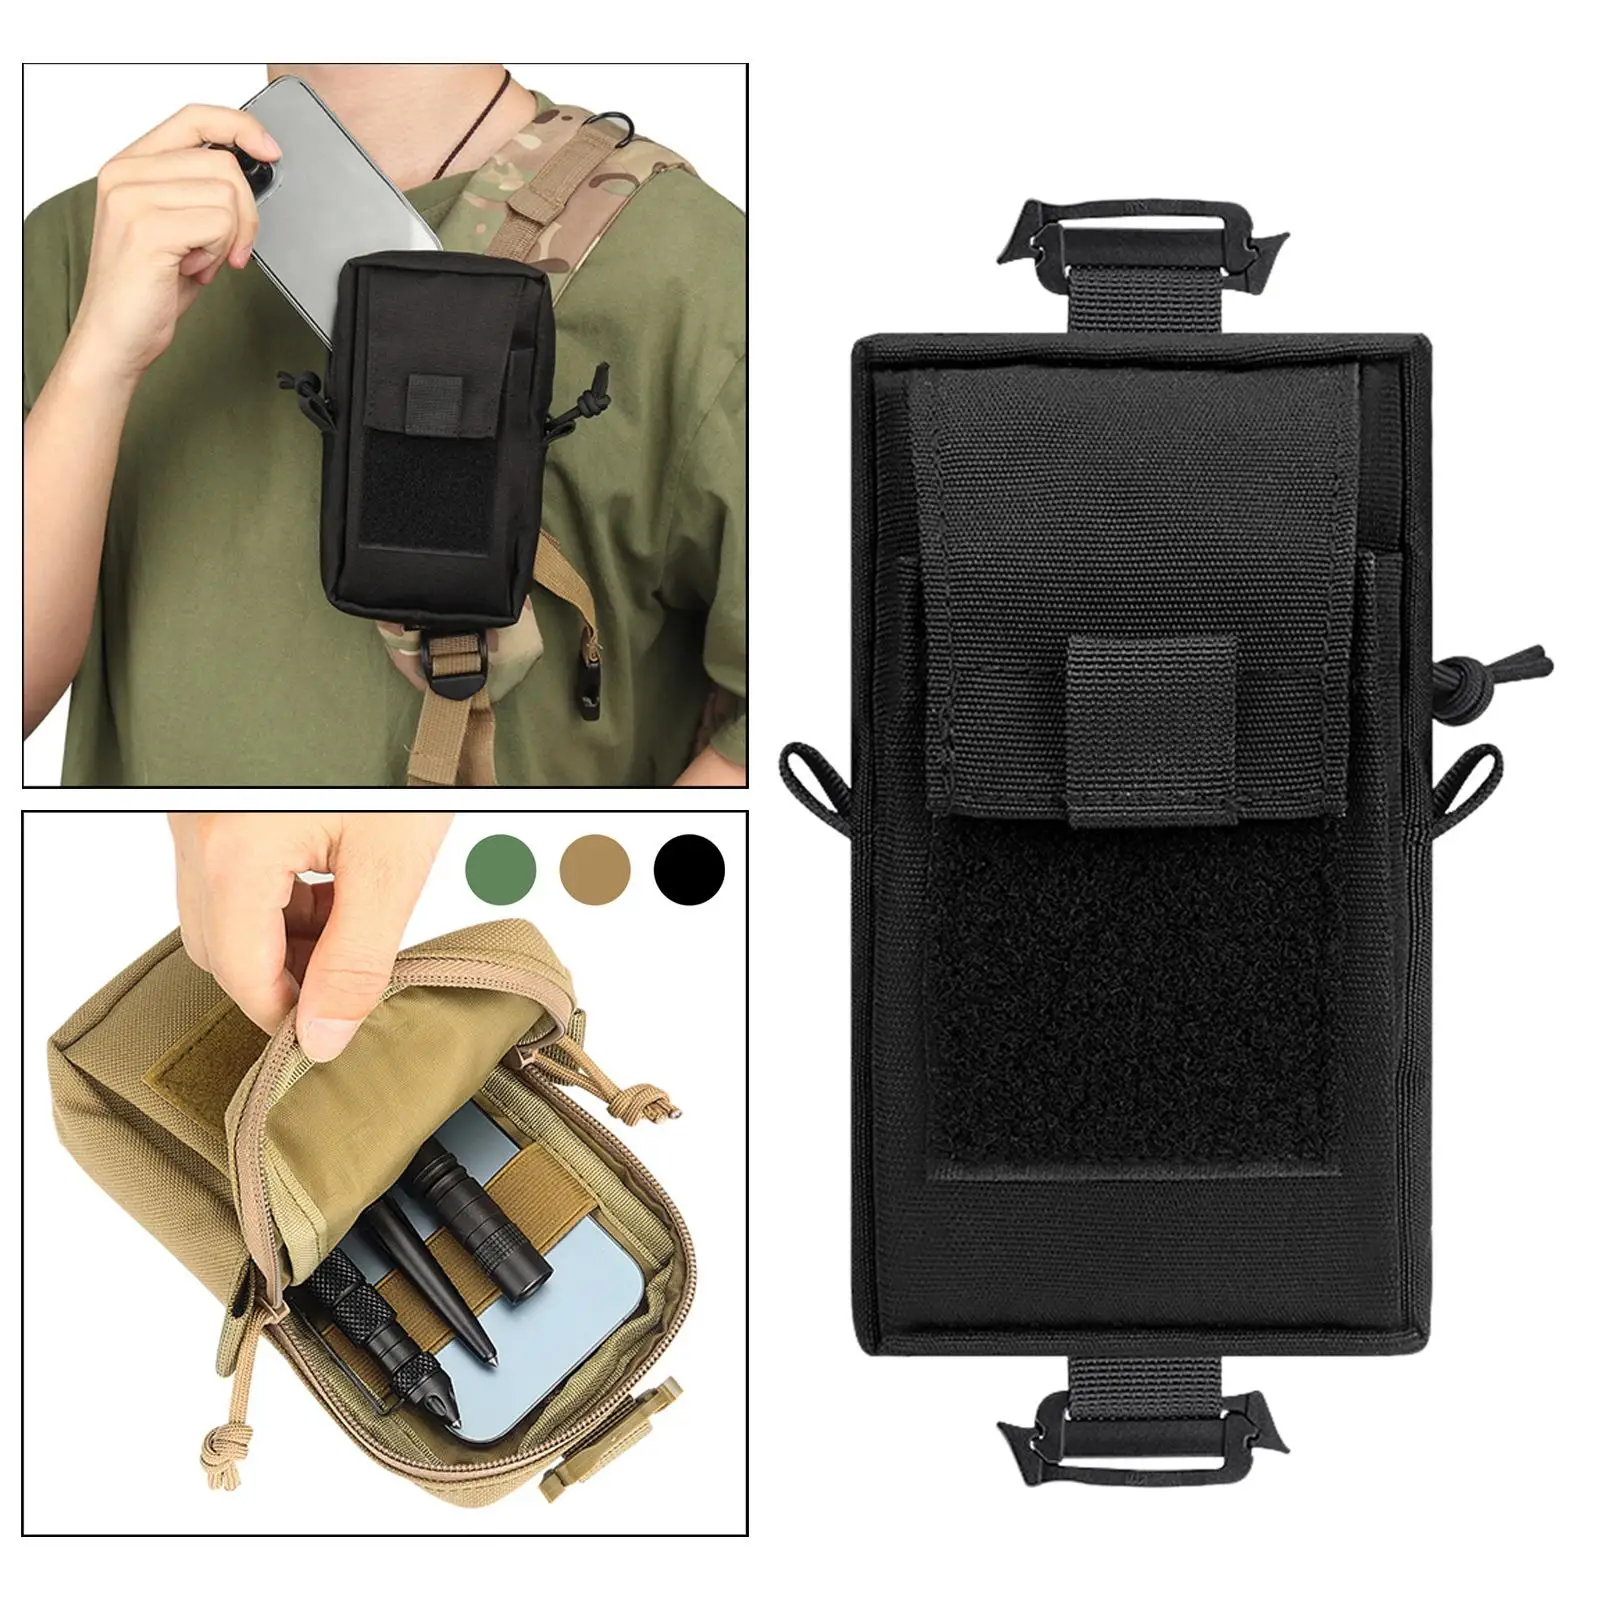 Multifunctionl Molle Mobile Phone Pouch Sundries  for Hunting Hiking Cmping Bckpcking Running